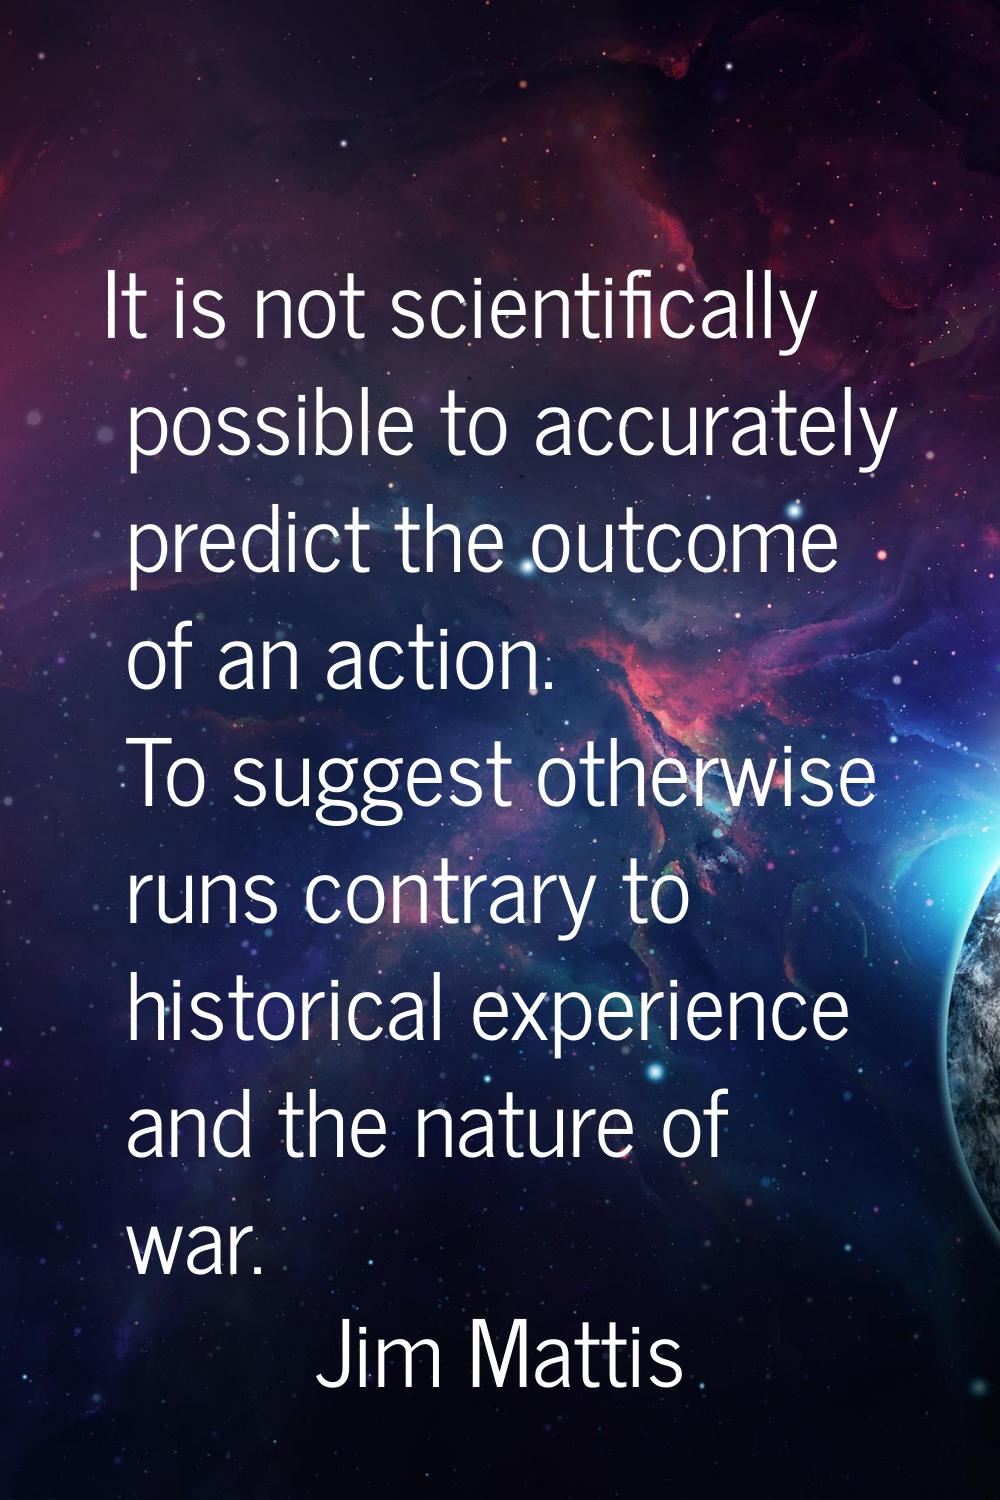 It is not scientifically possible to accurately predict the outcome of an action. To suggest otherw